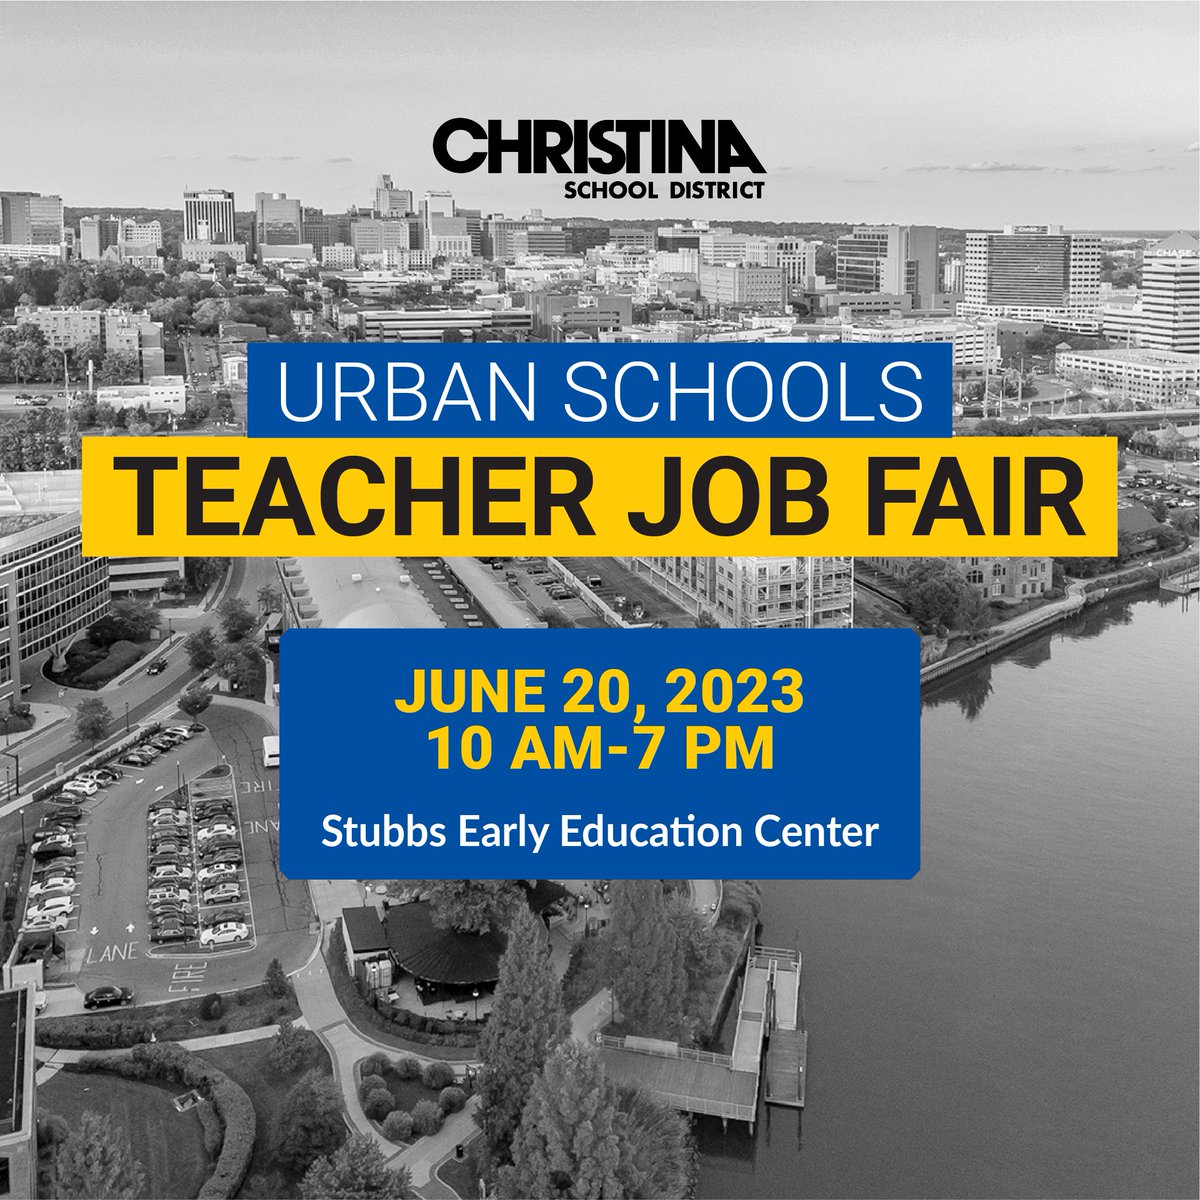 Join Christina School District for our Urban Schools Teacher Job Fair Today, June 20, from 10 AM - 7 PM, at the Stubbs Early Education Center.  We invite you to connect with our school and program administrators.
For questions, please don't hesitate to call (302) 429-4175.